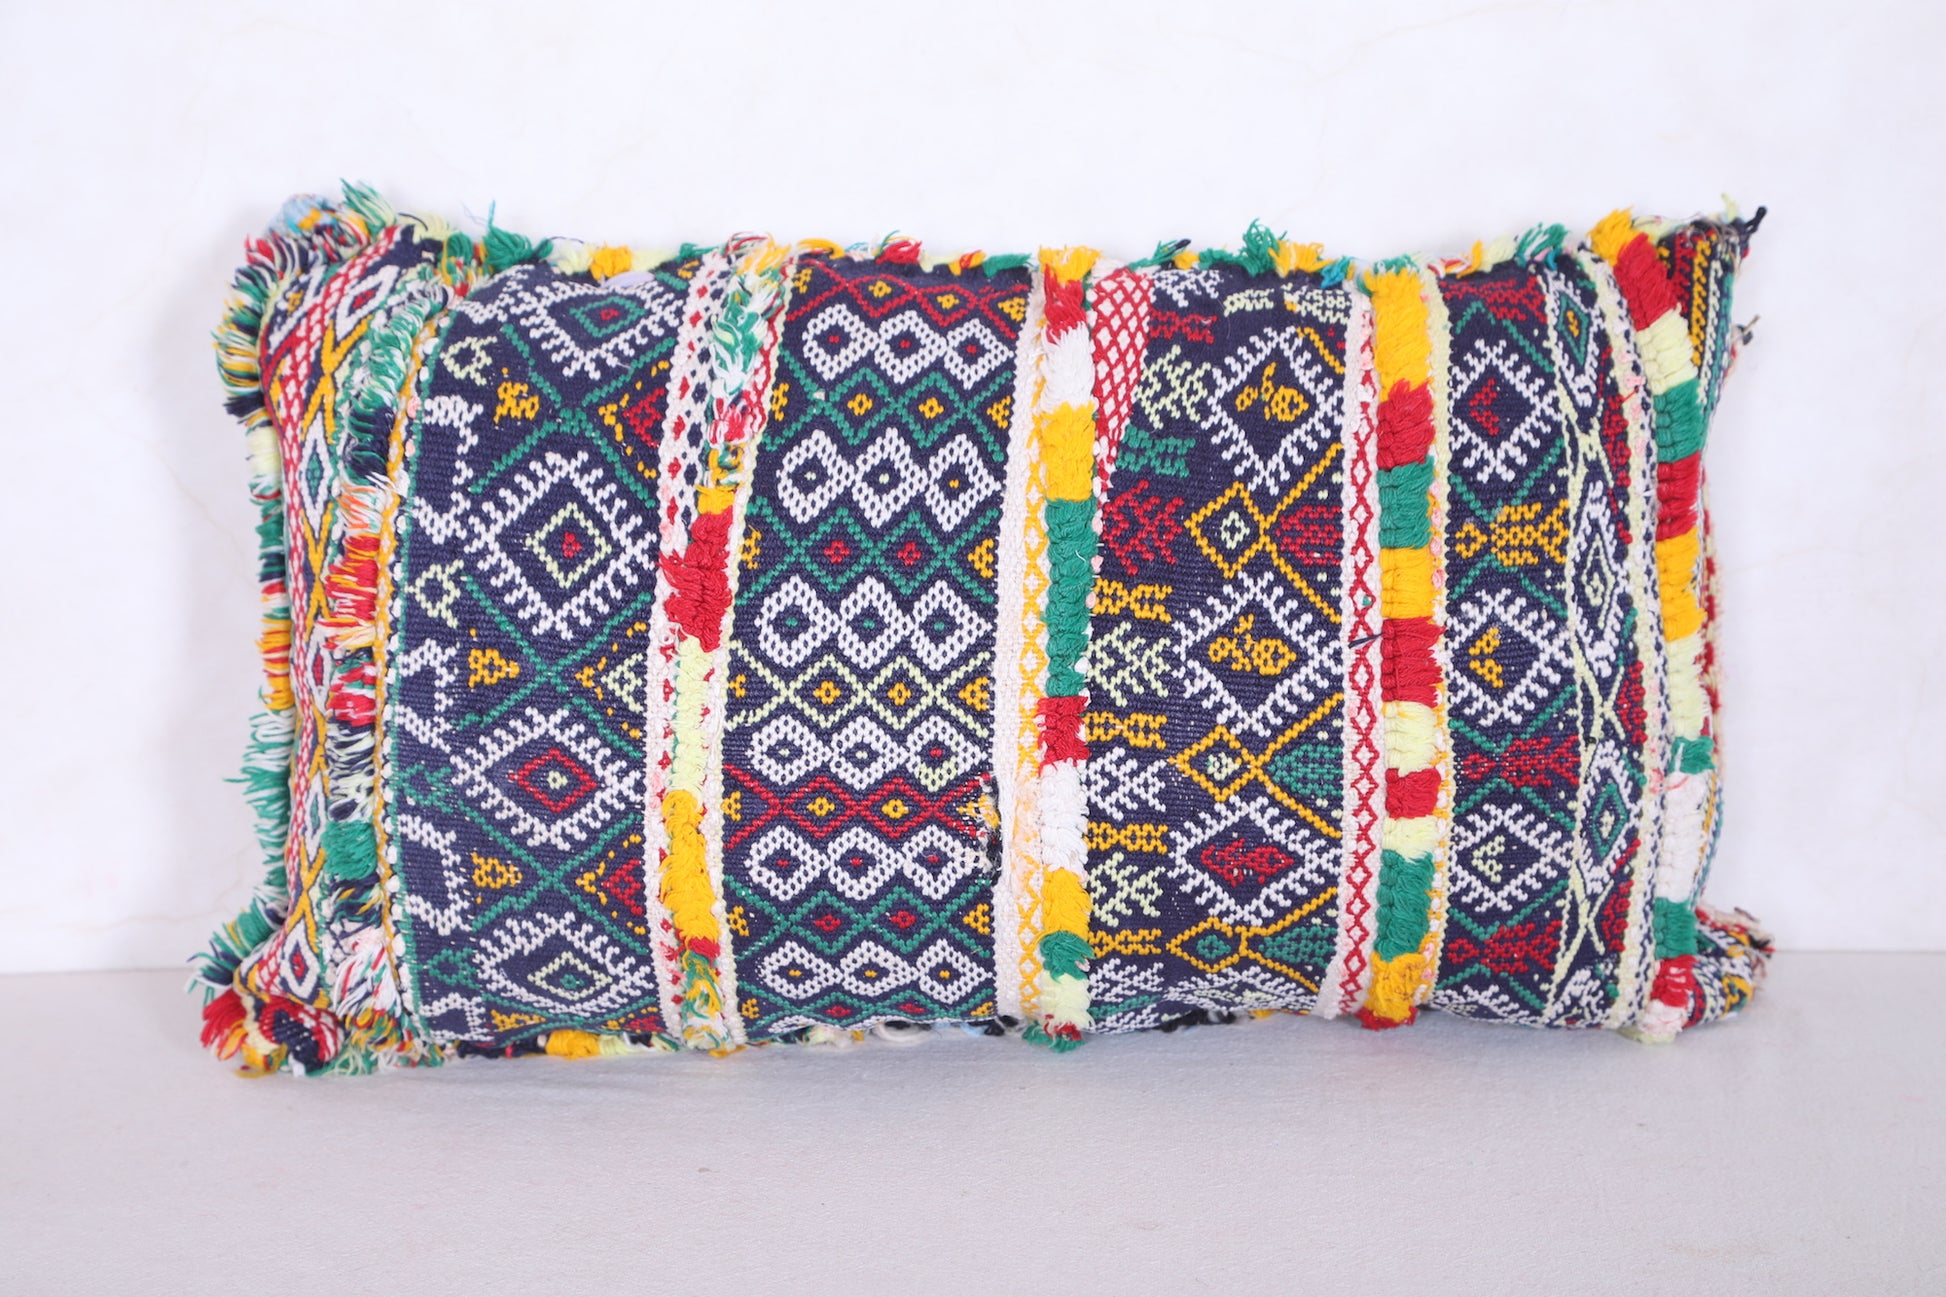 Moroccan handmade kilim pillow 14.1 INCHES X 22 INCHES